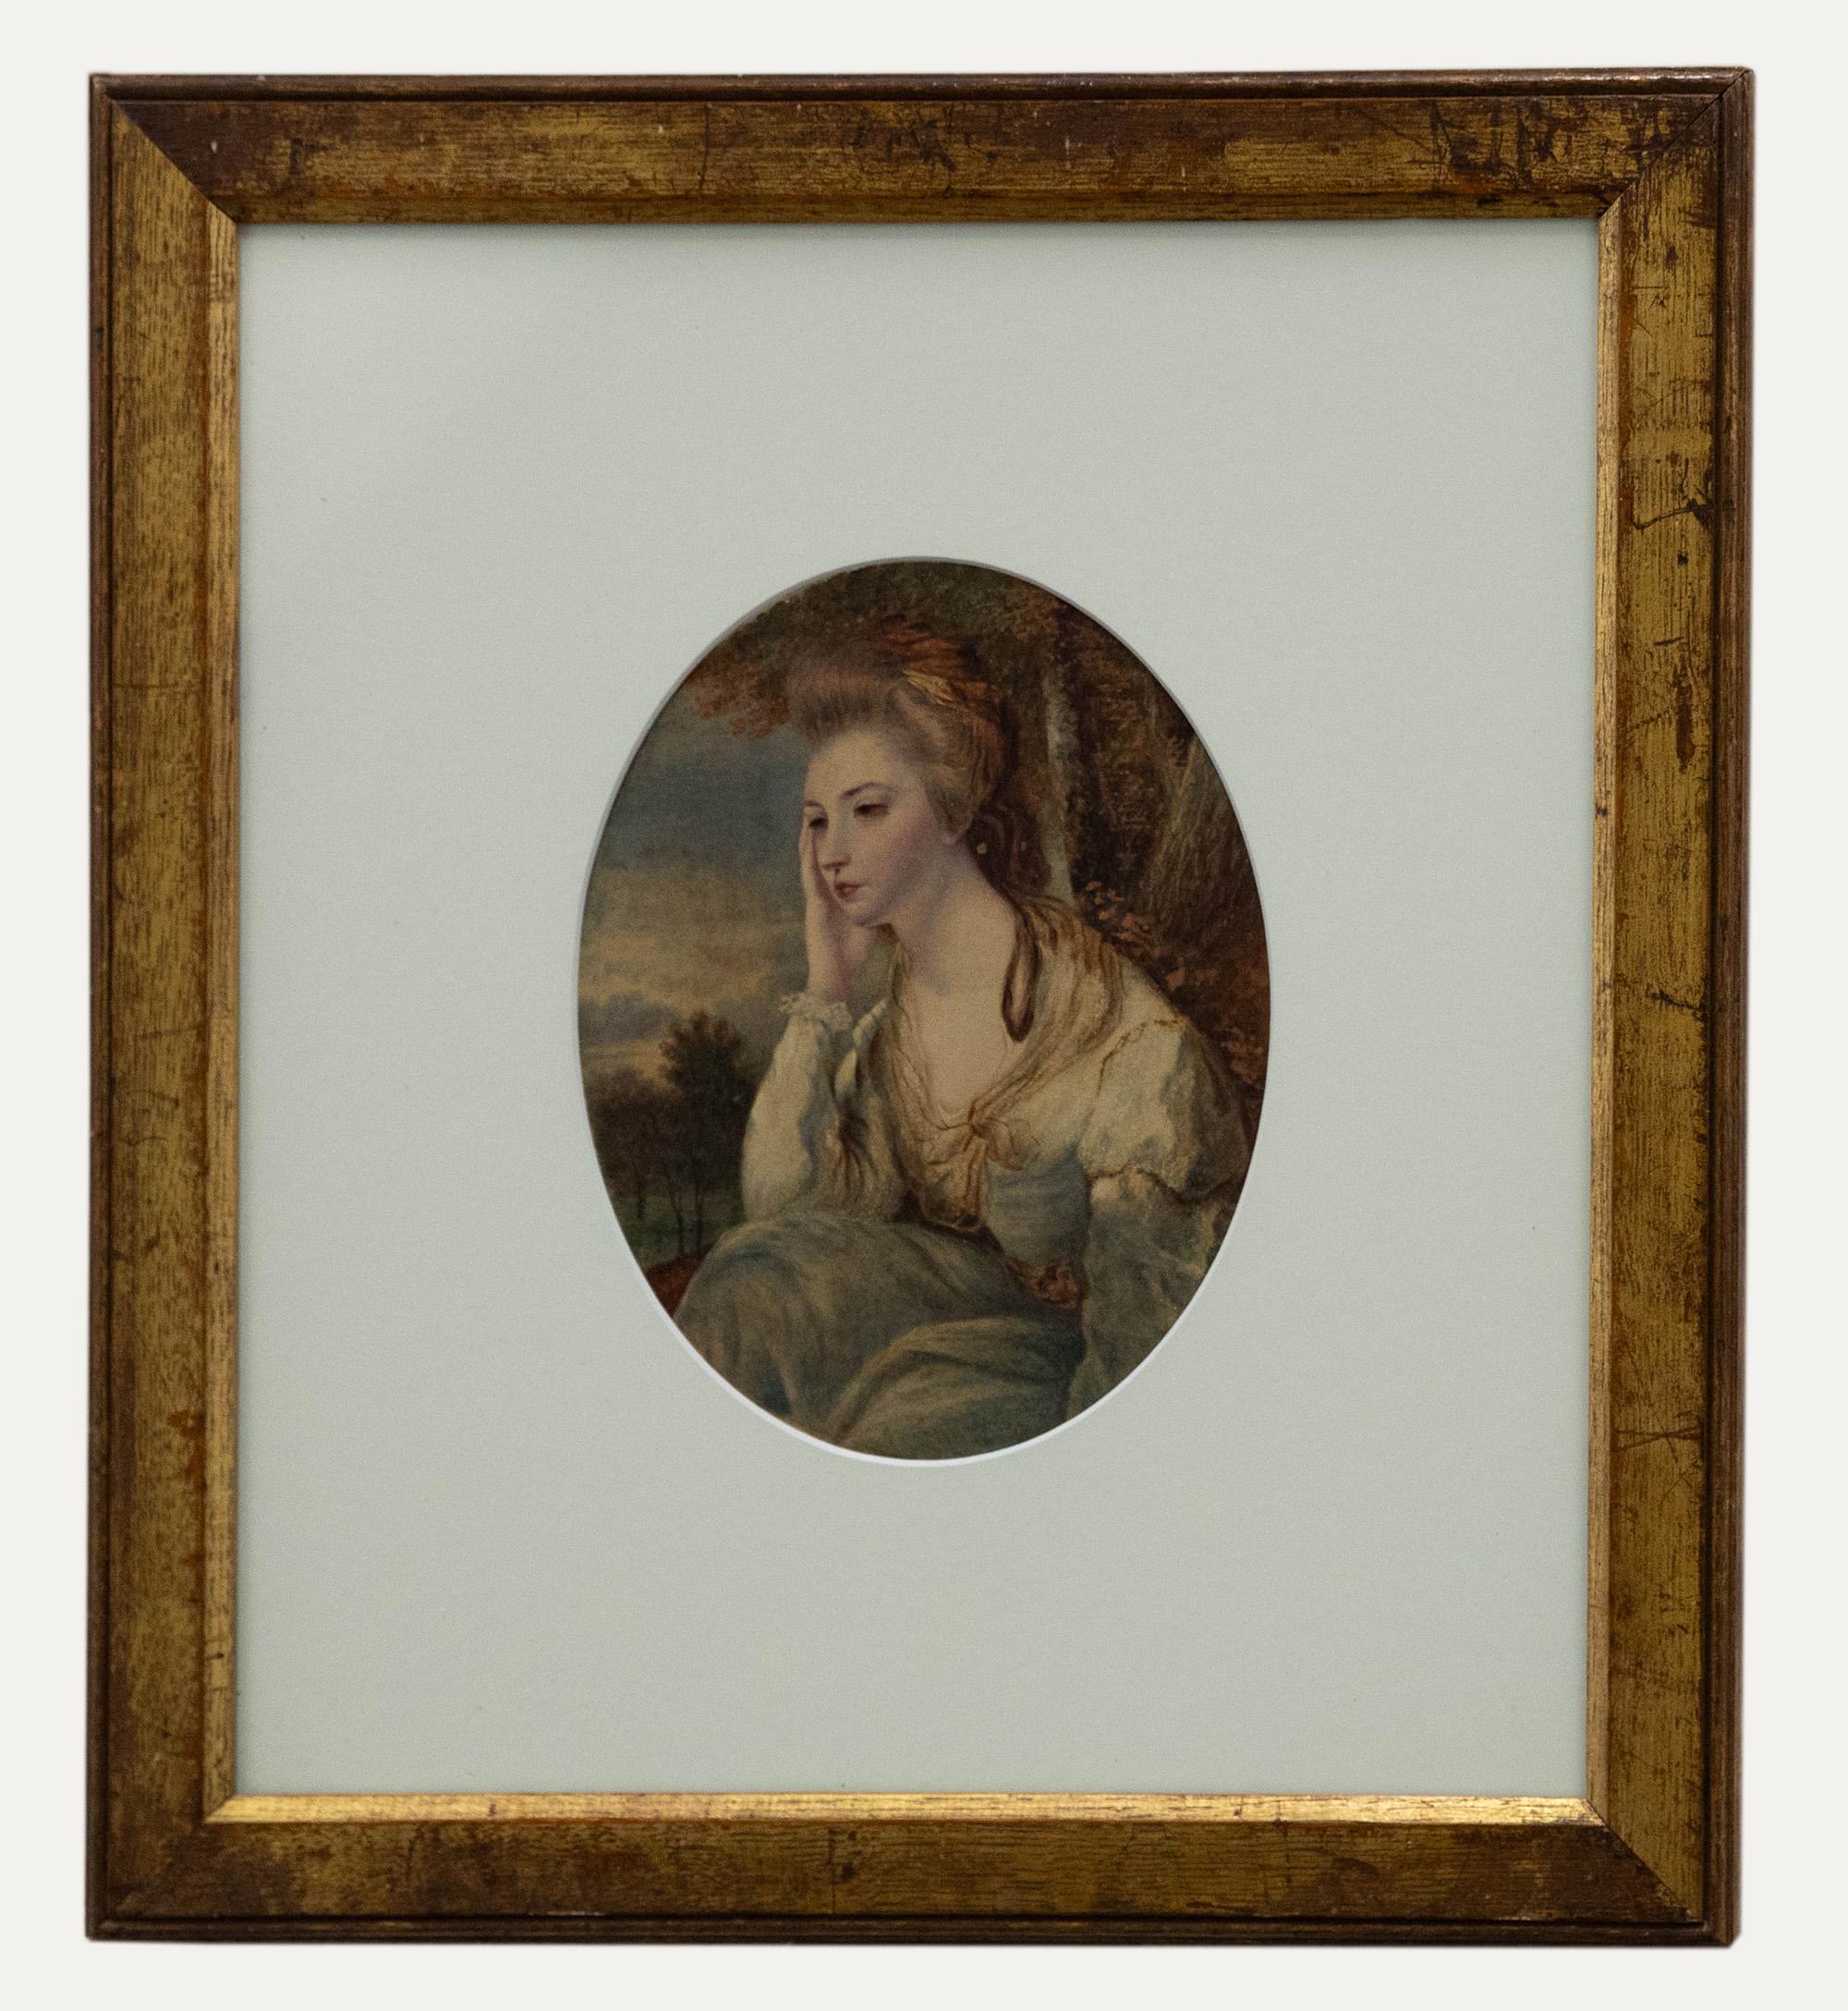 Unknown Portrait - Early 19th Century Watercolour - Reflective Beauty